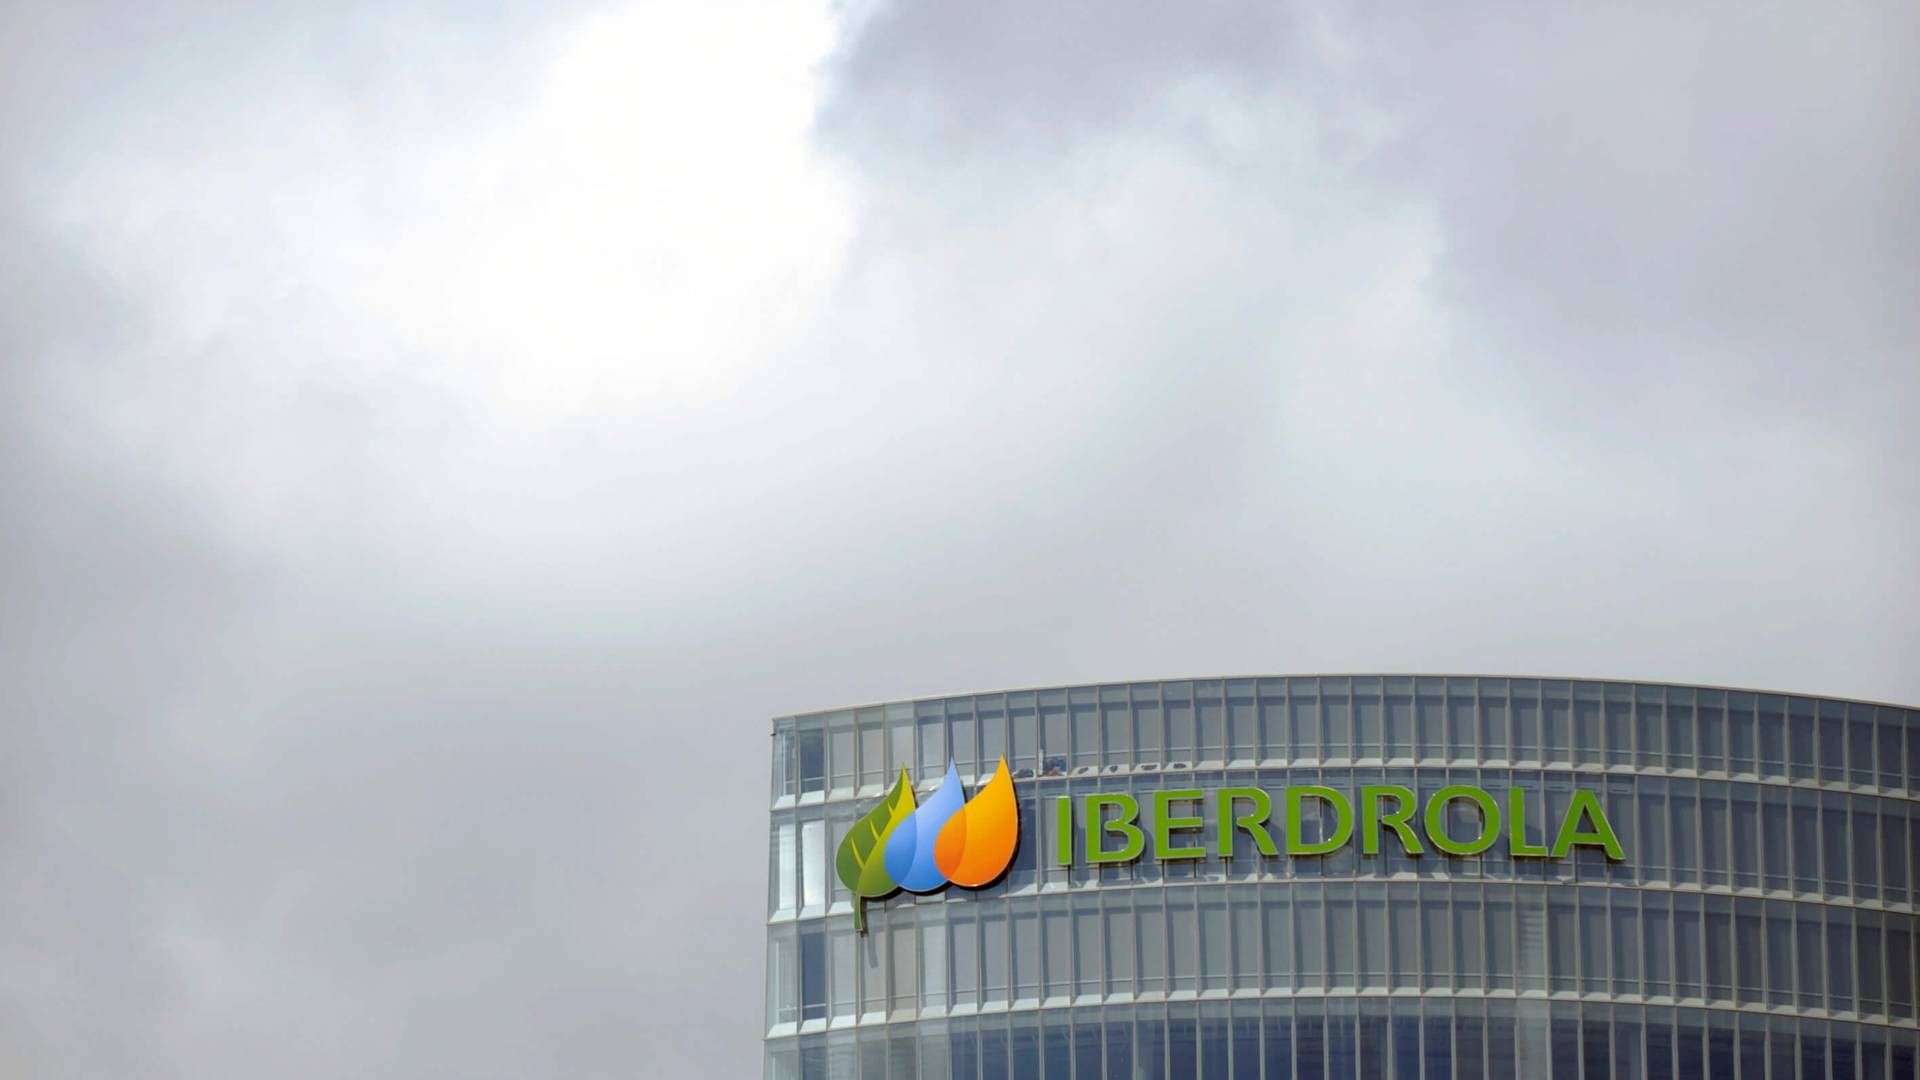 The solid start to the year has also led Iberdrola to raise its expectations. Iberdrola now expects net earnings in the high single digits from the previous middle single digits. | Photo: Pr / Iberdrola